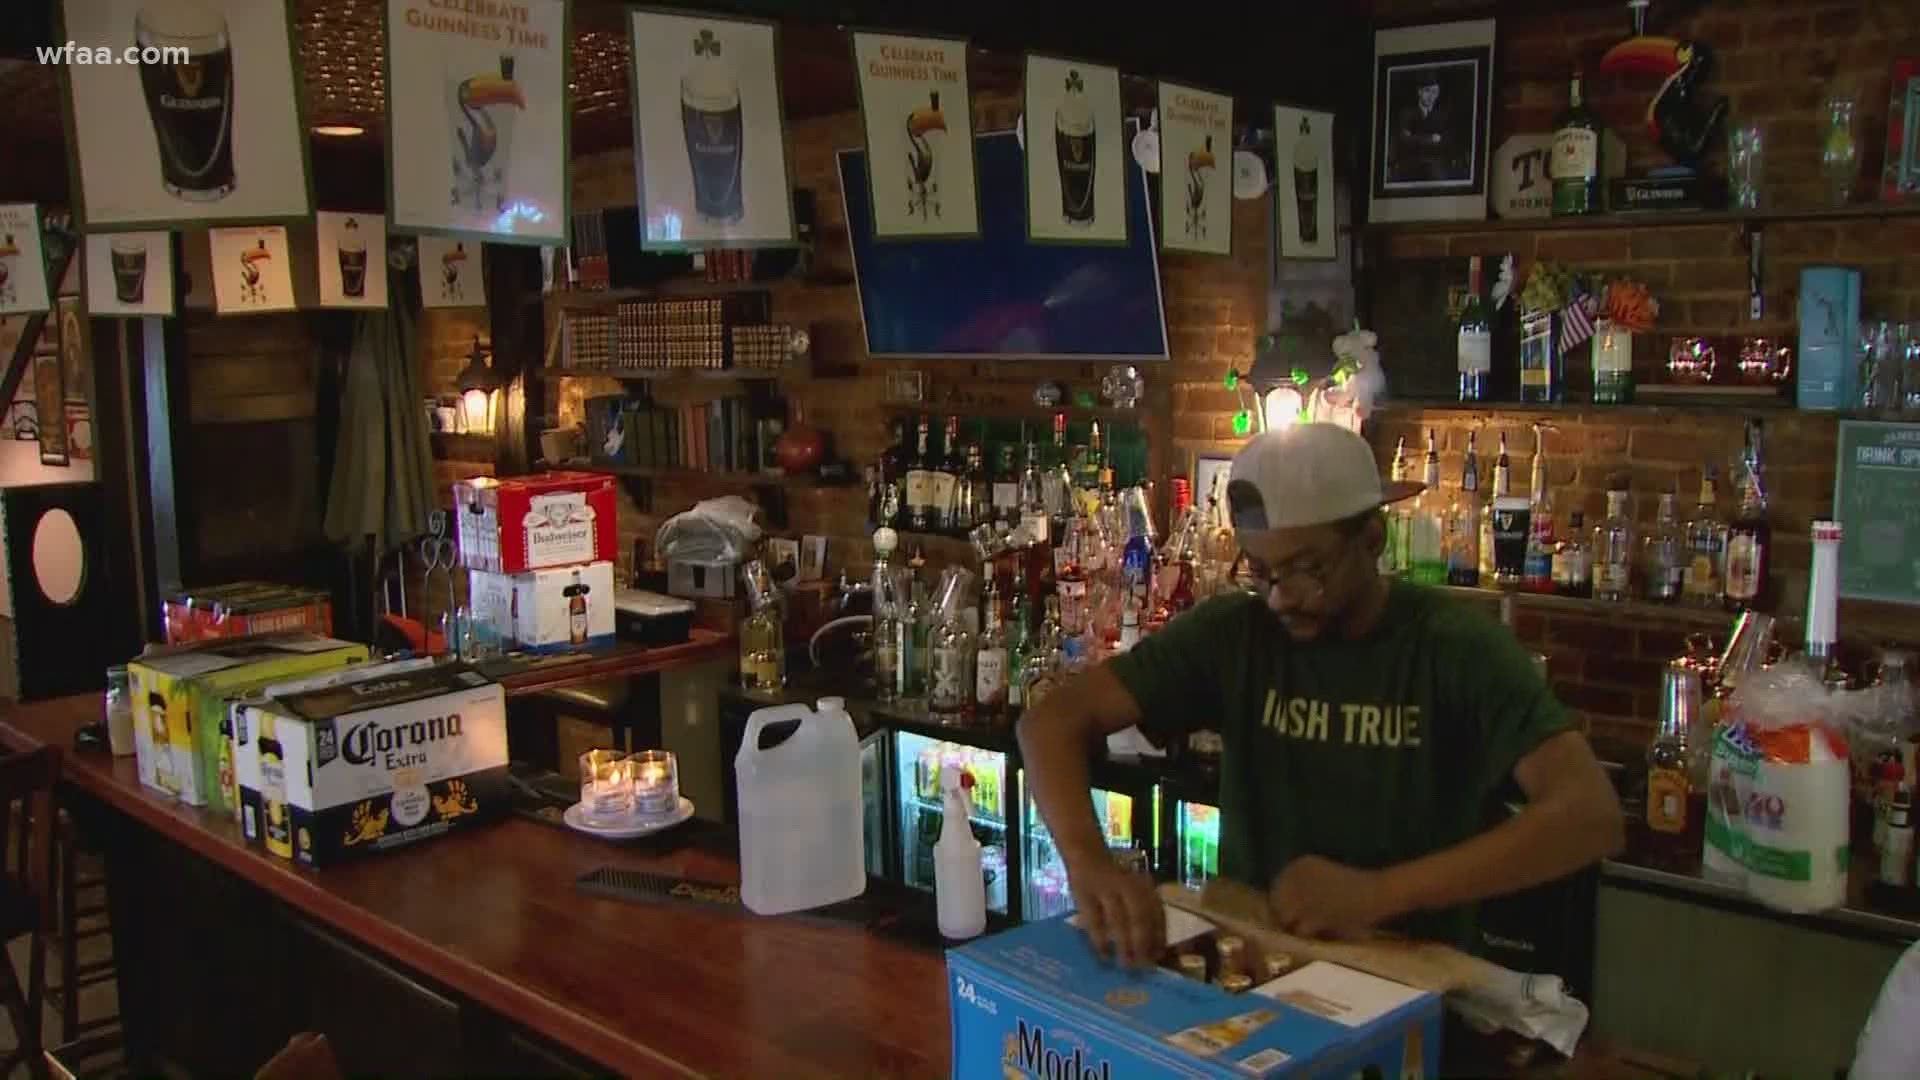 Bars reopened and from what WFAA saw, they should reach 25 percent occupancy with no problem.